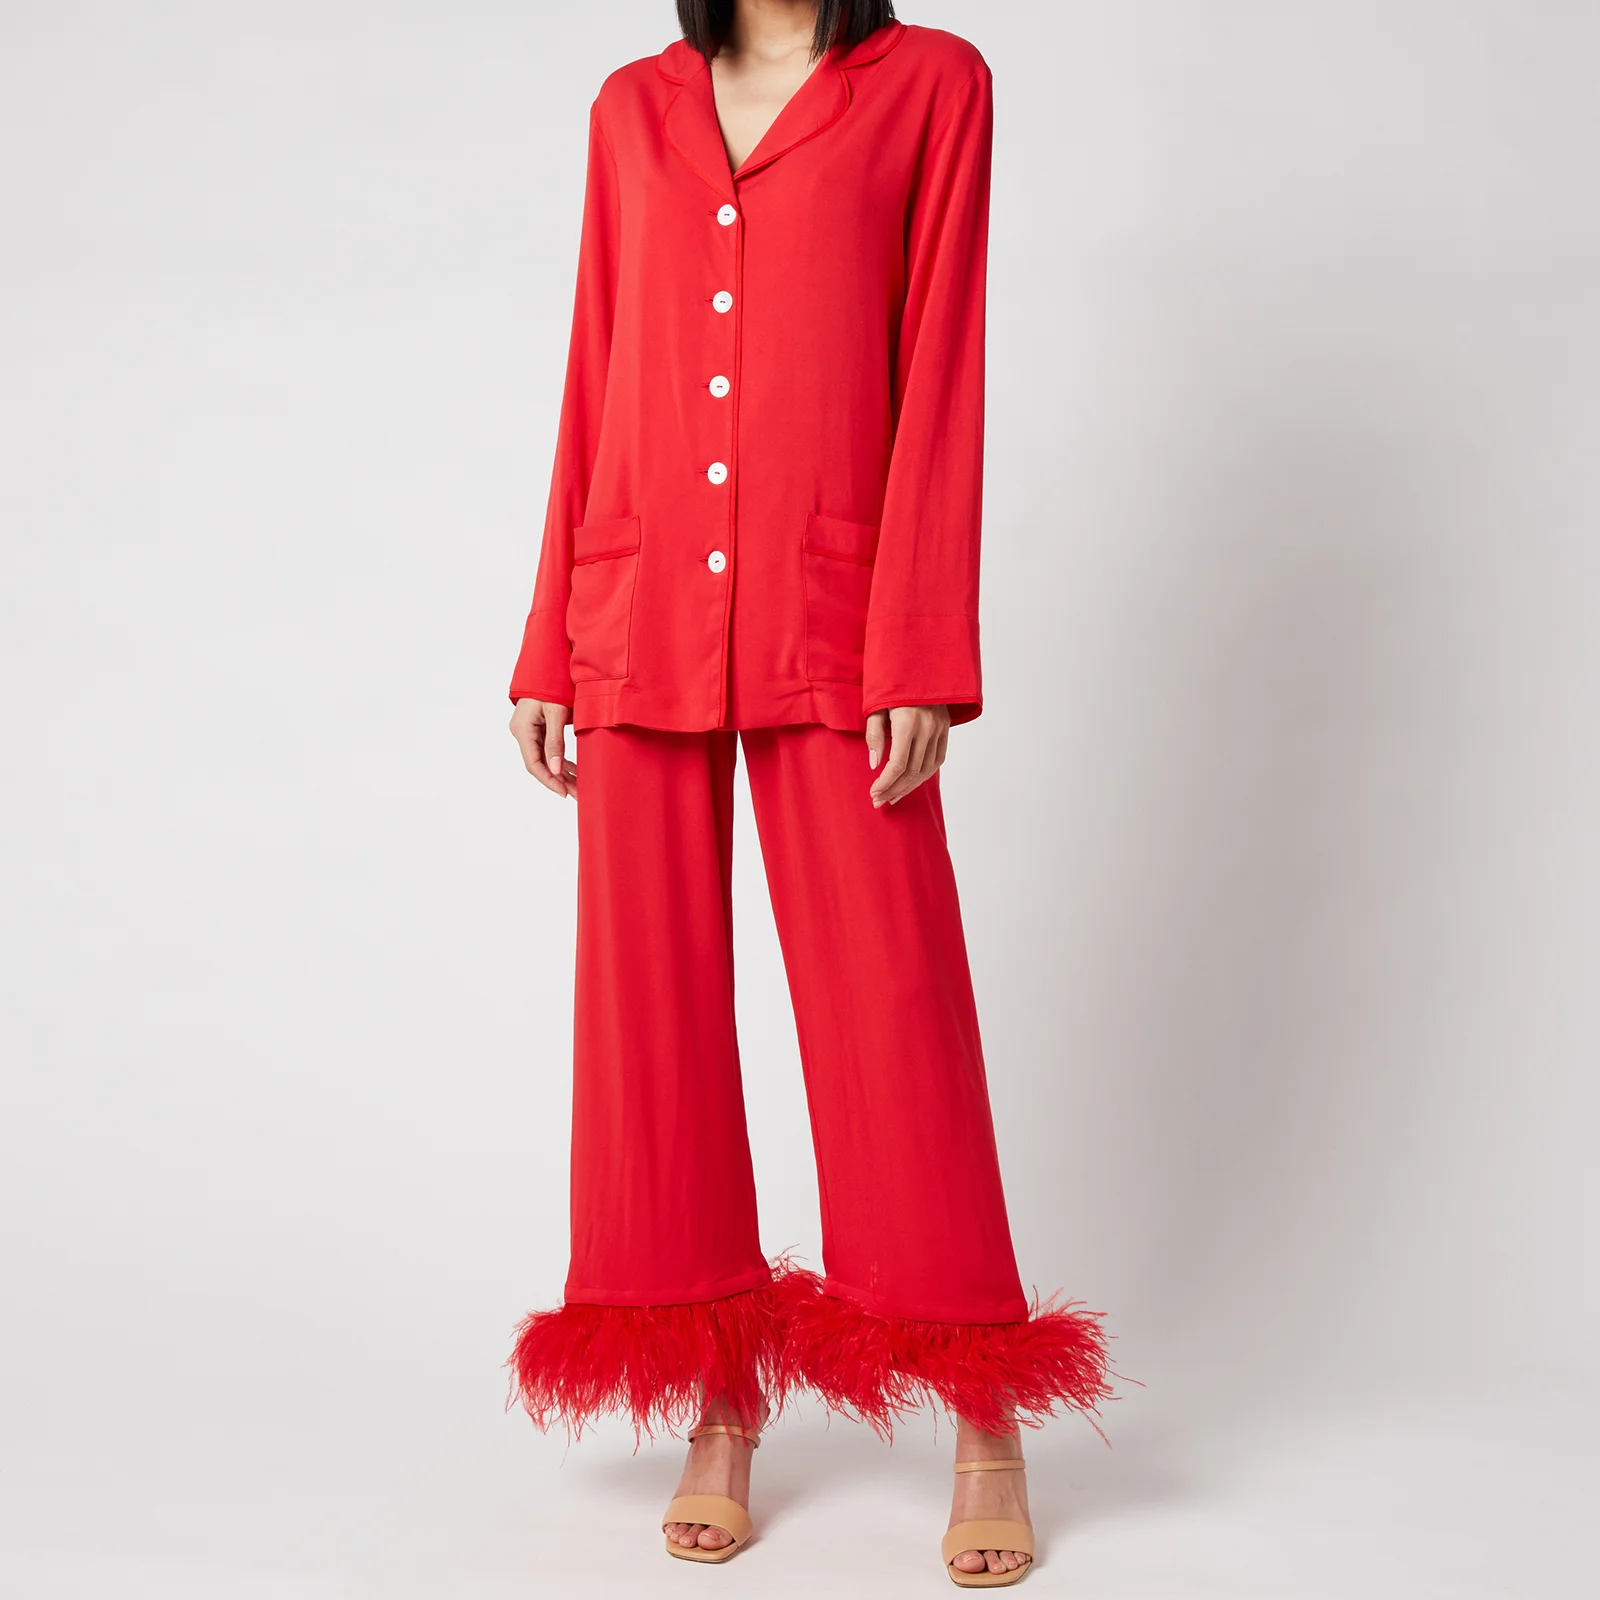 Sleeper Women's Party Pyjama Set with Feathers - Red Image 1